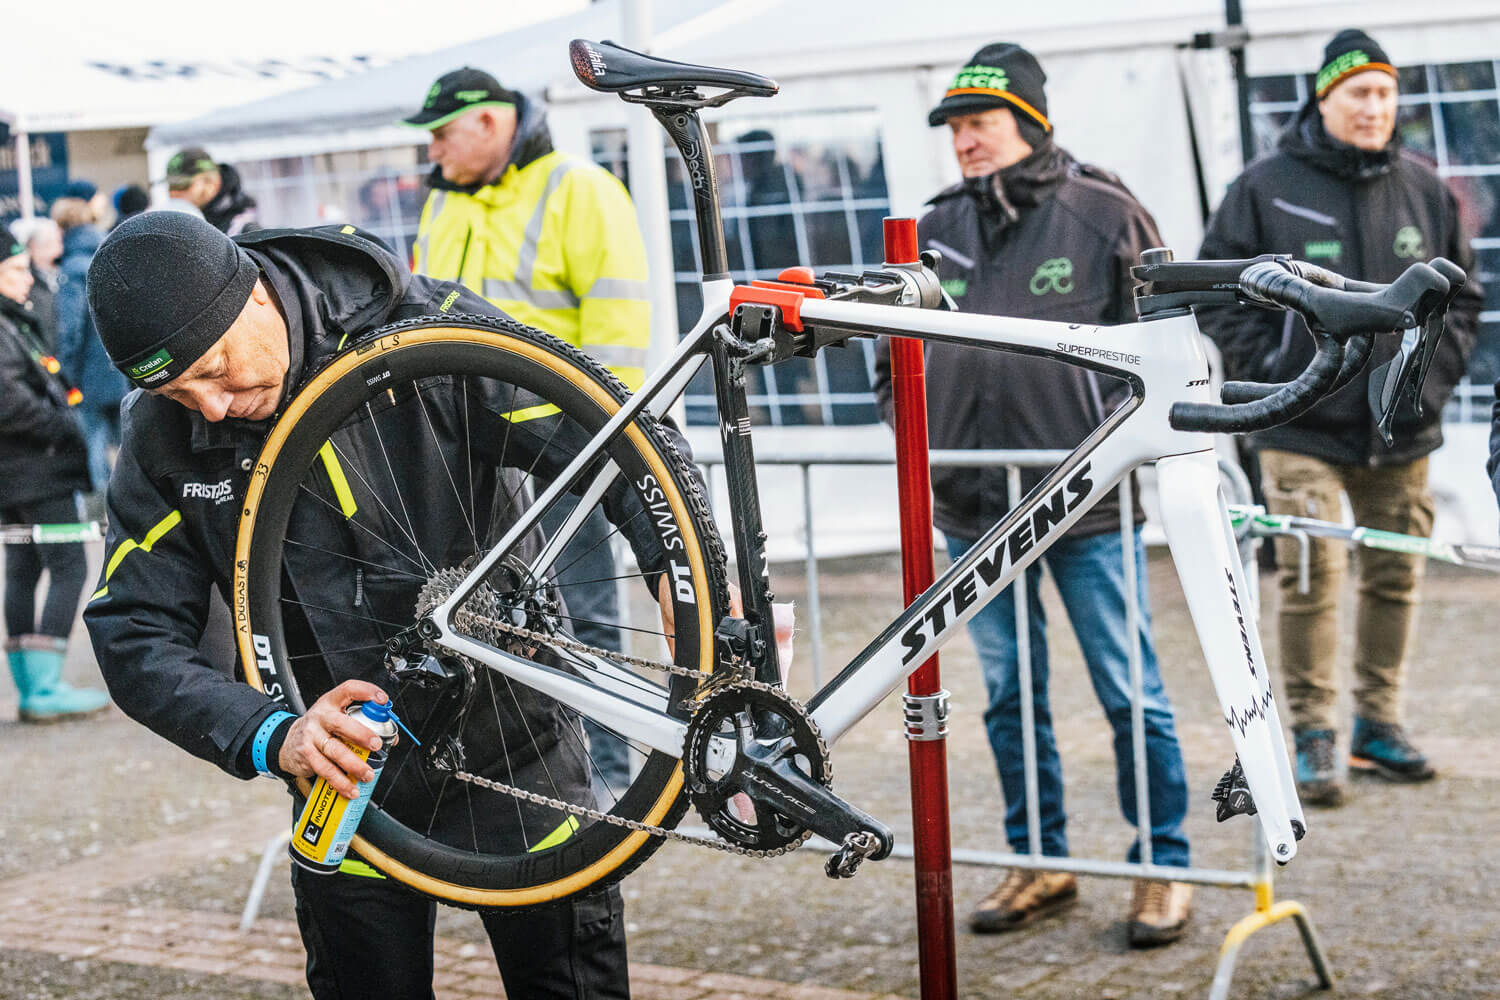 Man working on cyclocross bicycle outdoors at event.